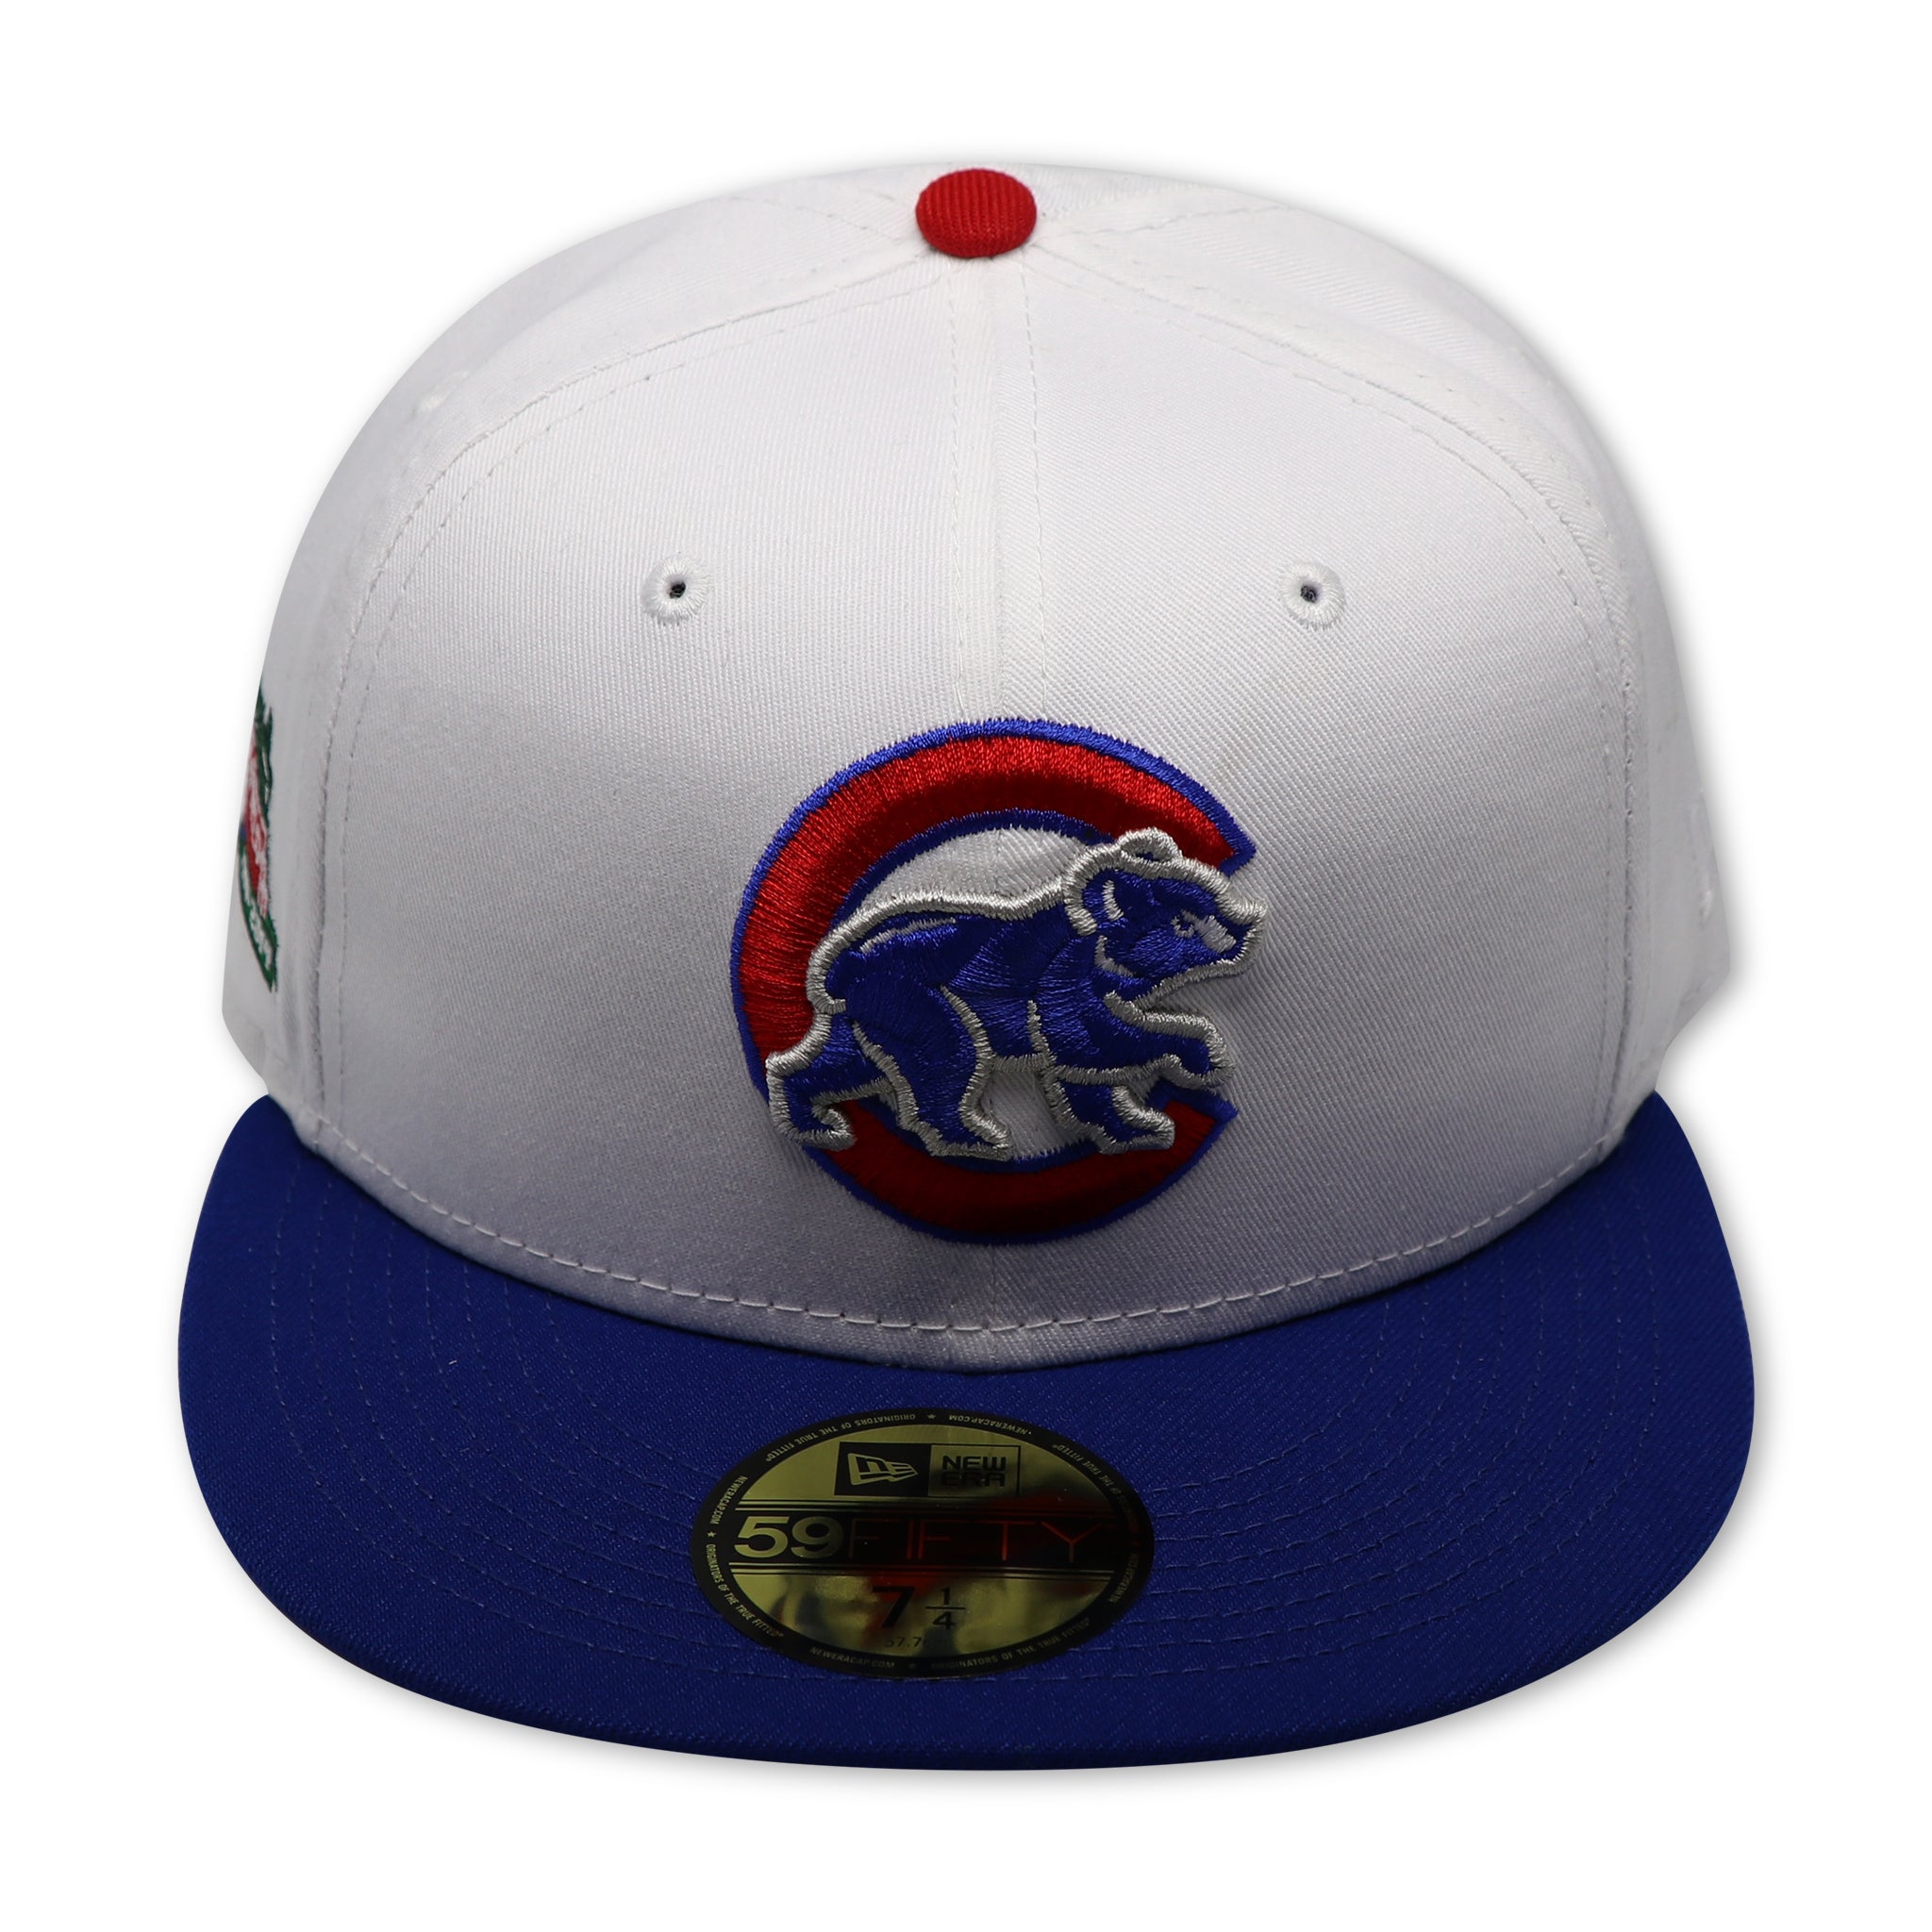 CHICAGO CUBS (WRIGLEY FIELD "100TH ANNIVERSARY") NEW ERA 59FIFTY FITTED (RED UNDER VISOR)